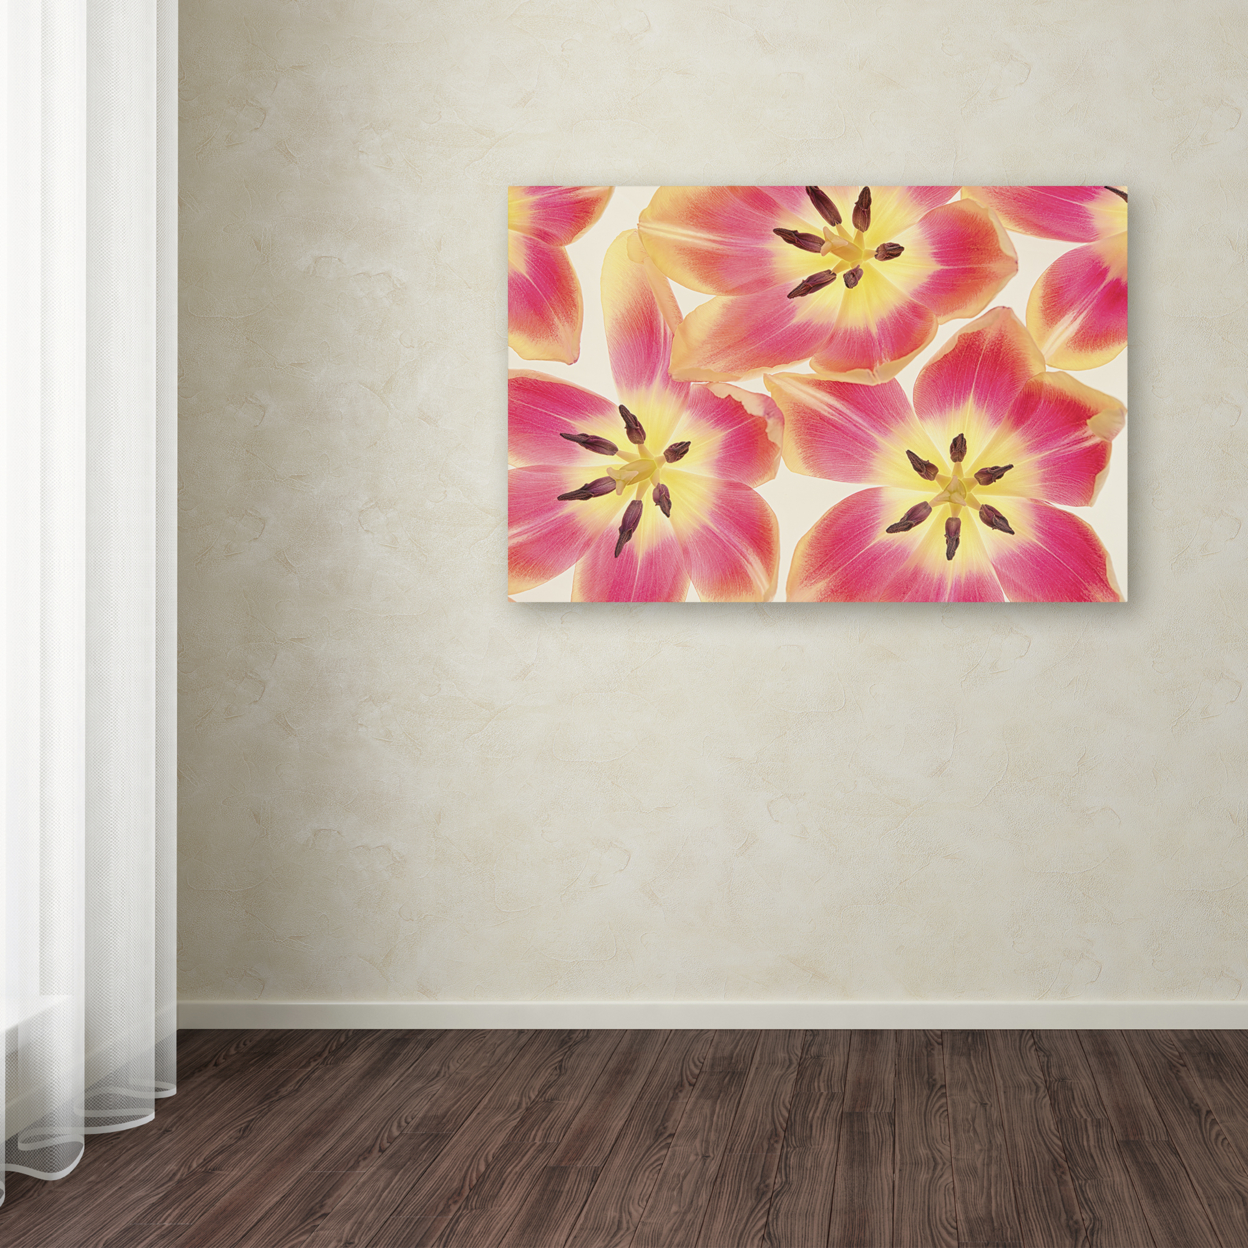 Cora Niele 'Cerise And Yellow Tulips' Canvas Art 16 X 24